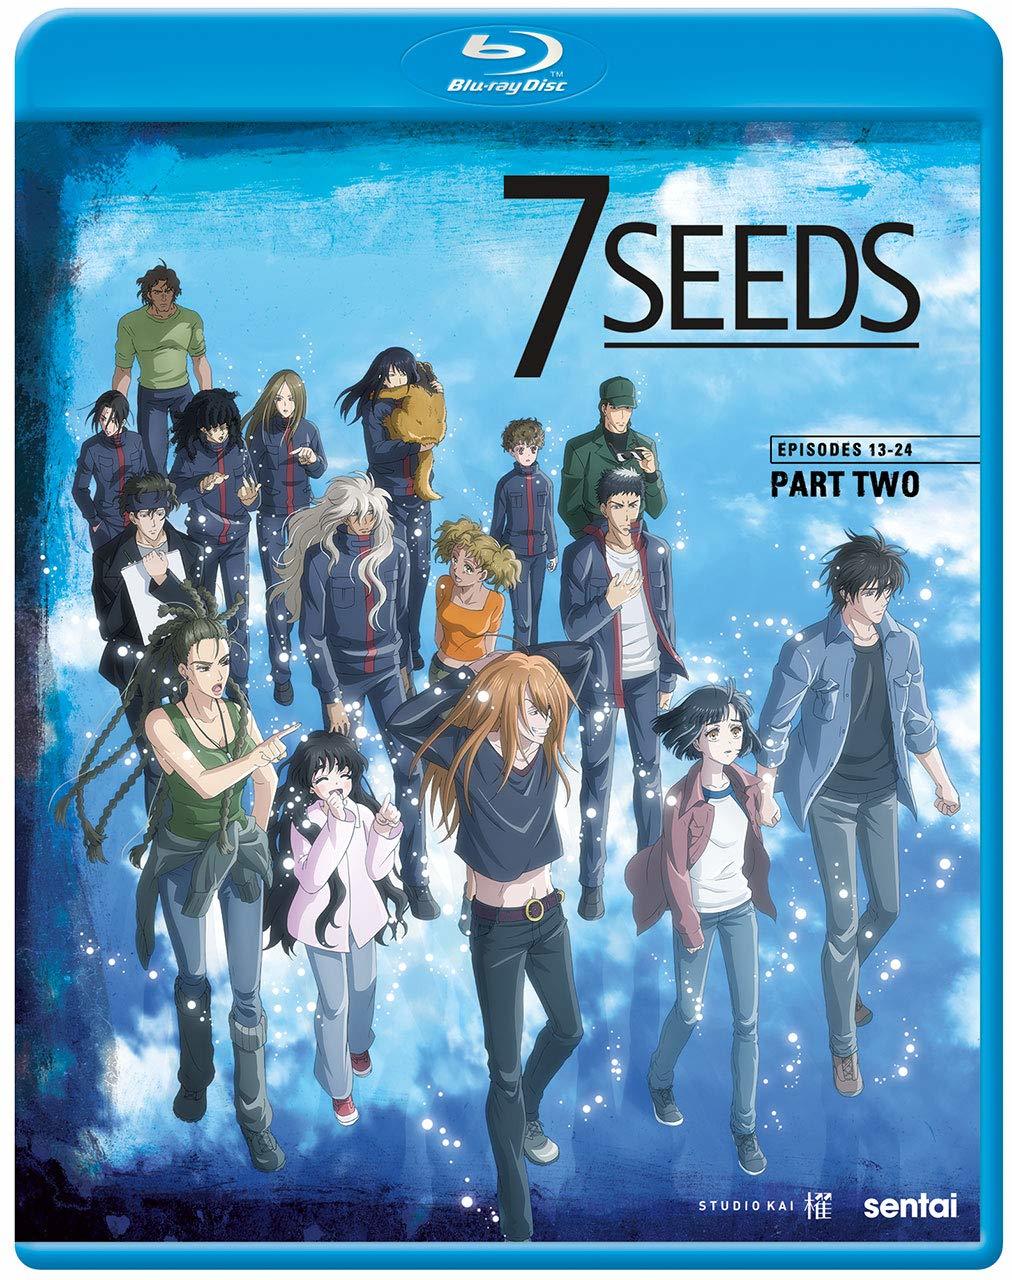 7 Seeds Blu-ray (Part Two / Episodes 13-24)